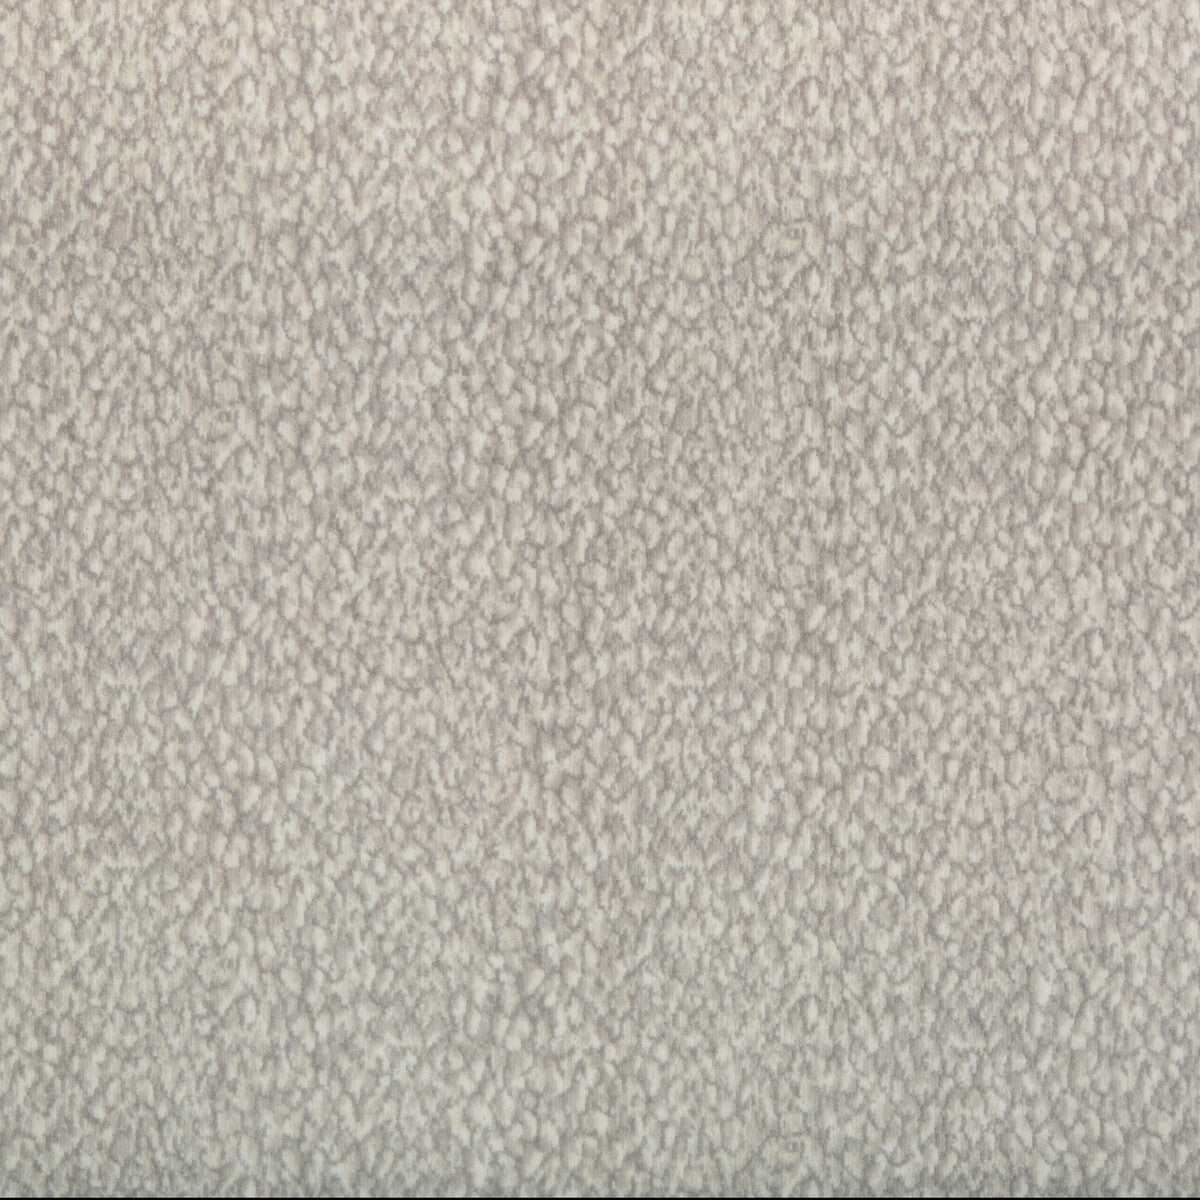 Littlerock fabric in stone color - pattern 34980.11.0 - by Kravet Basics in the Jeffrey Alan Marks Oceanview collection